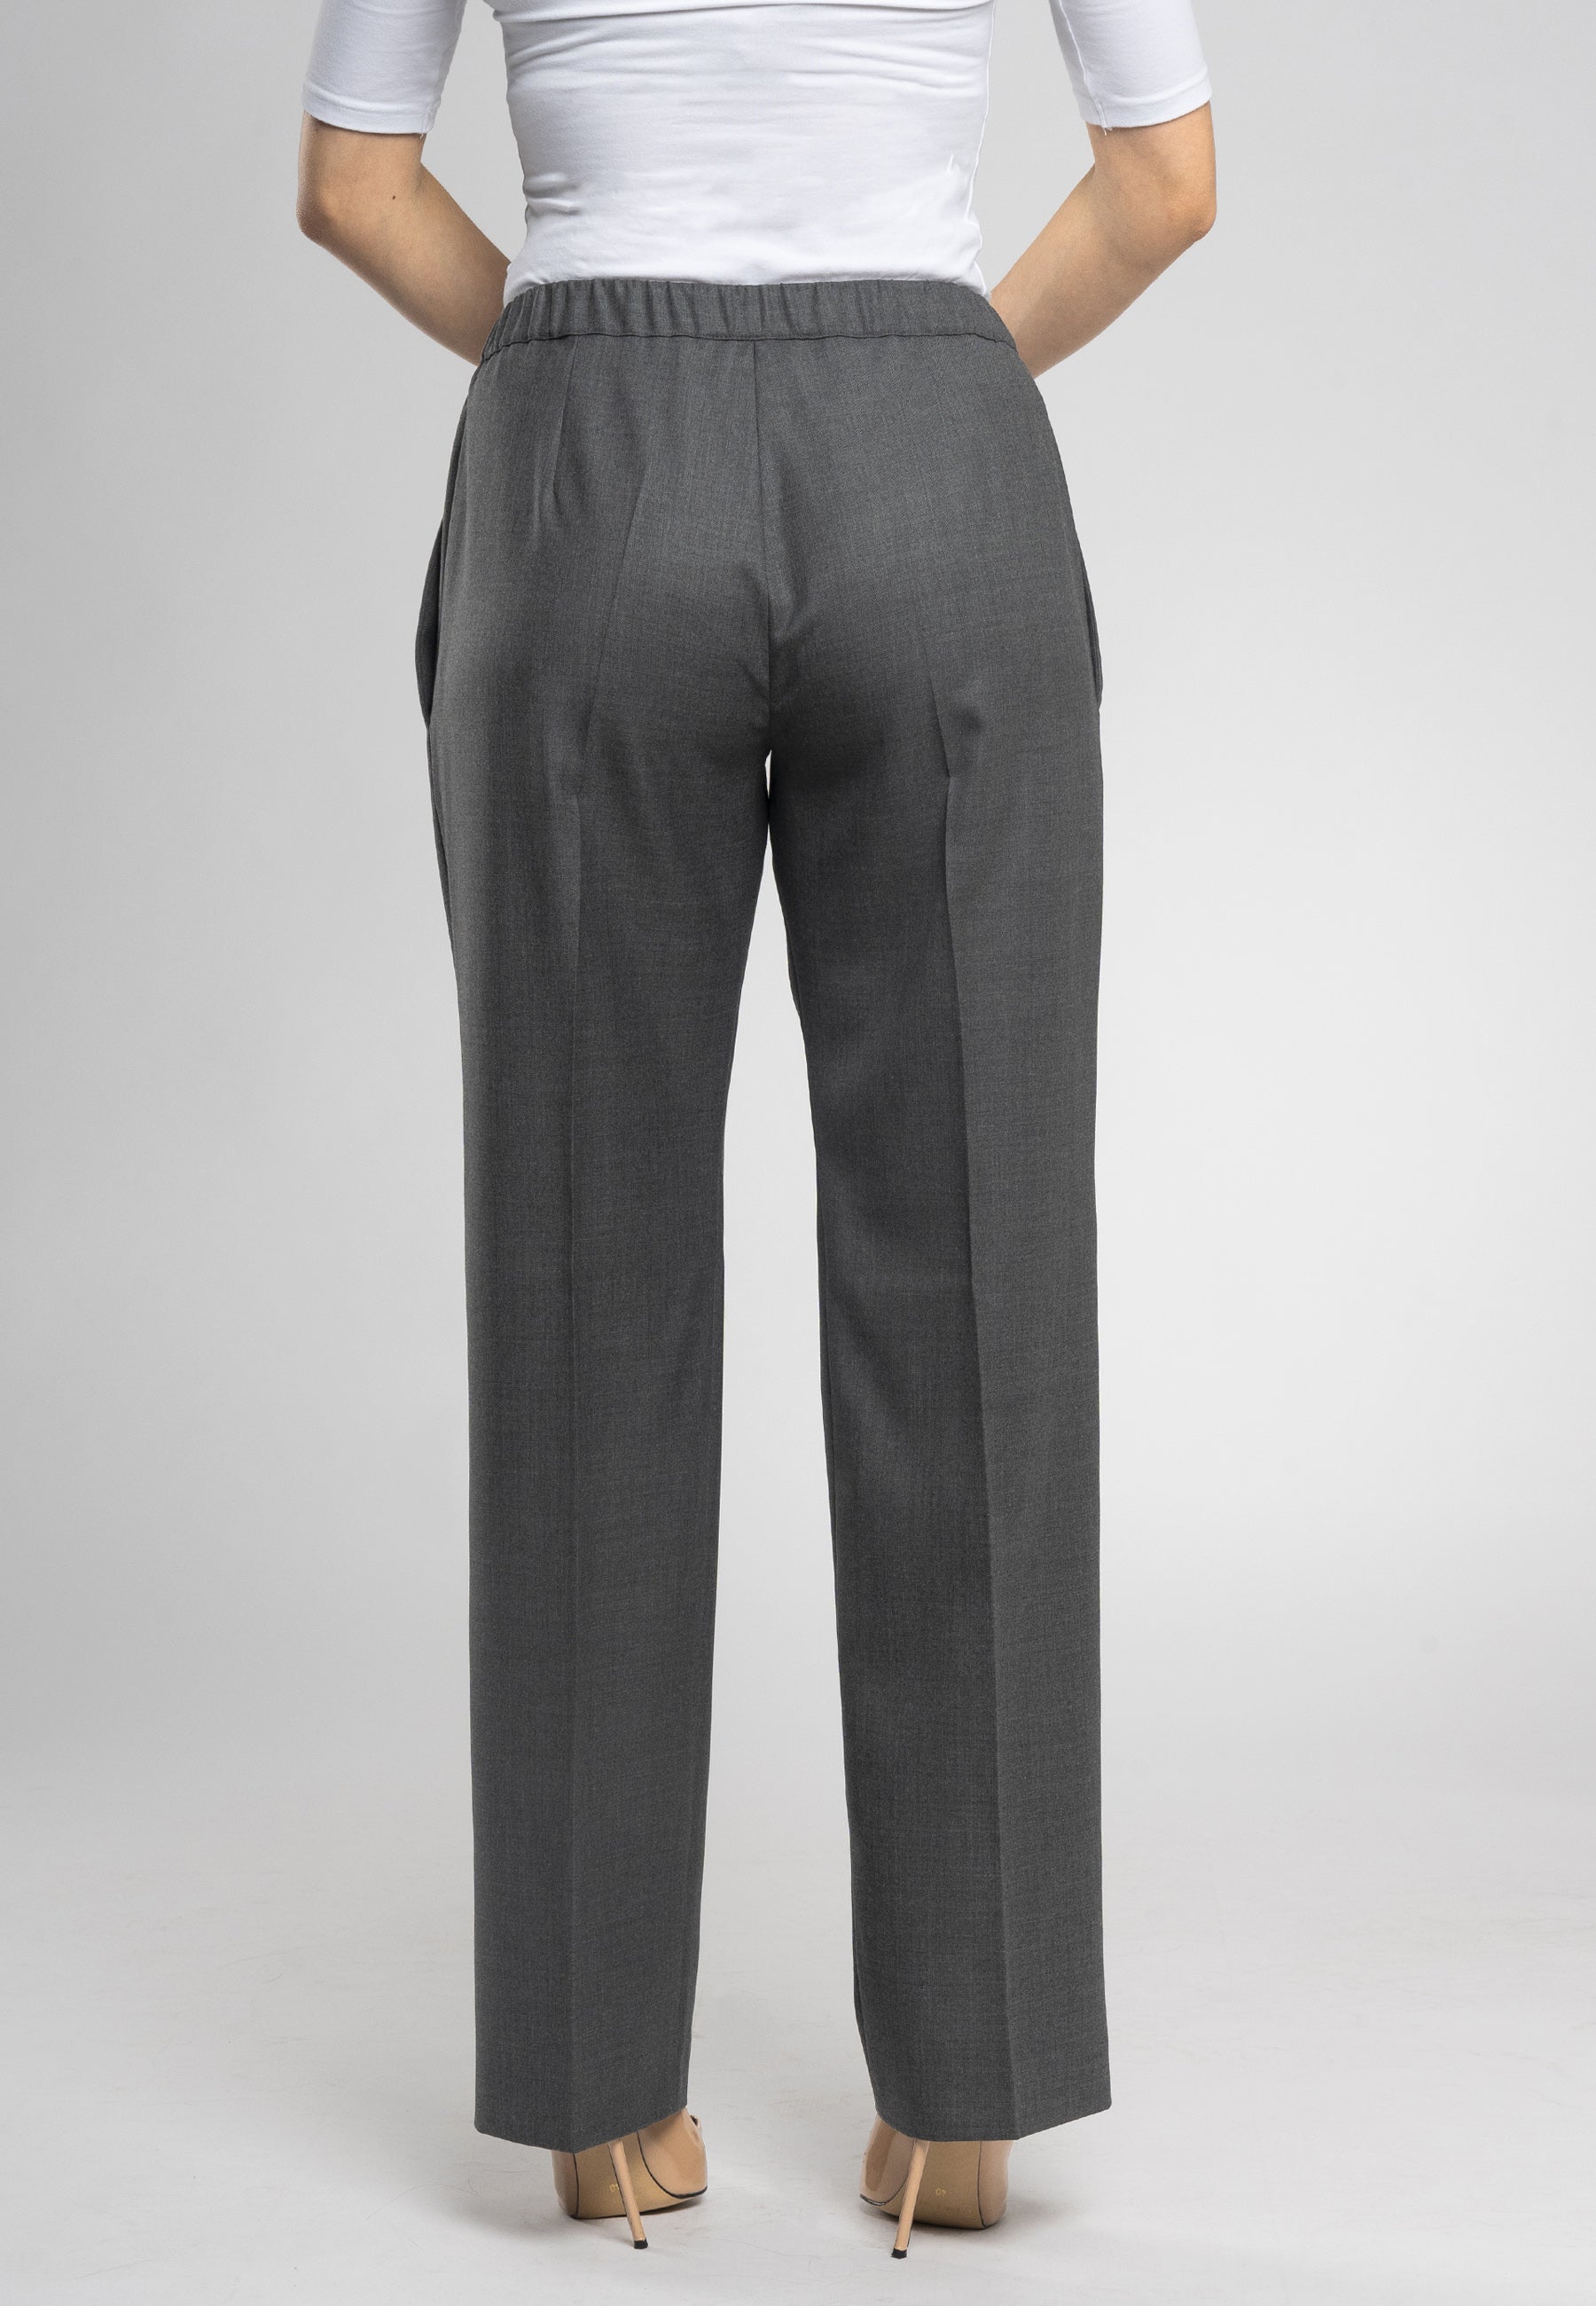 Italian wool trousers, drawstring waist trousers, high-quality wool pants, timeless design trousers, Italian style clothing